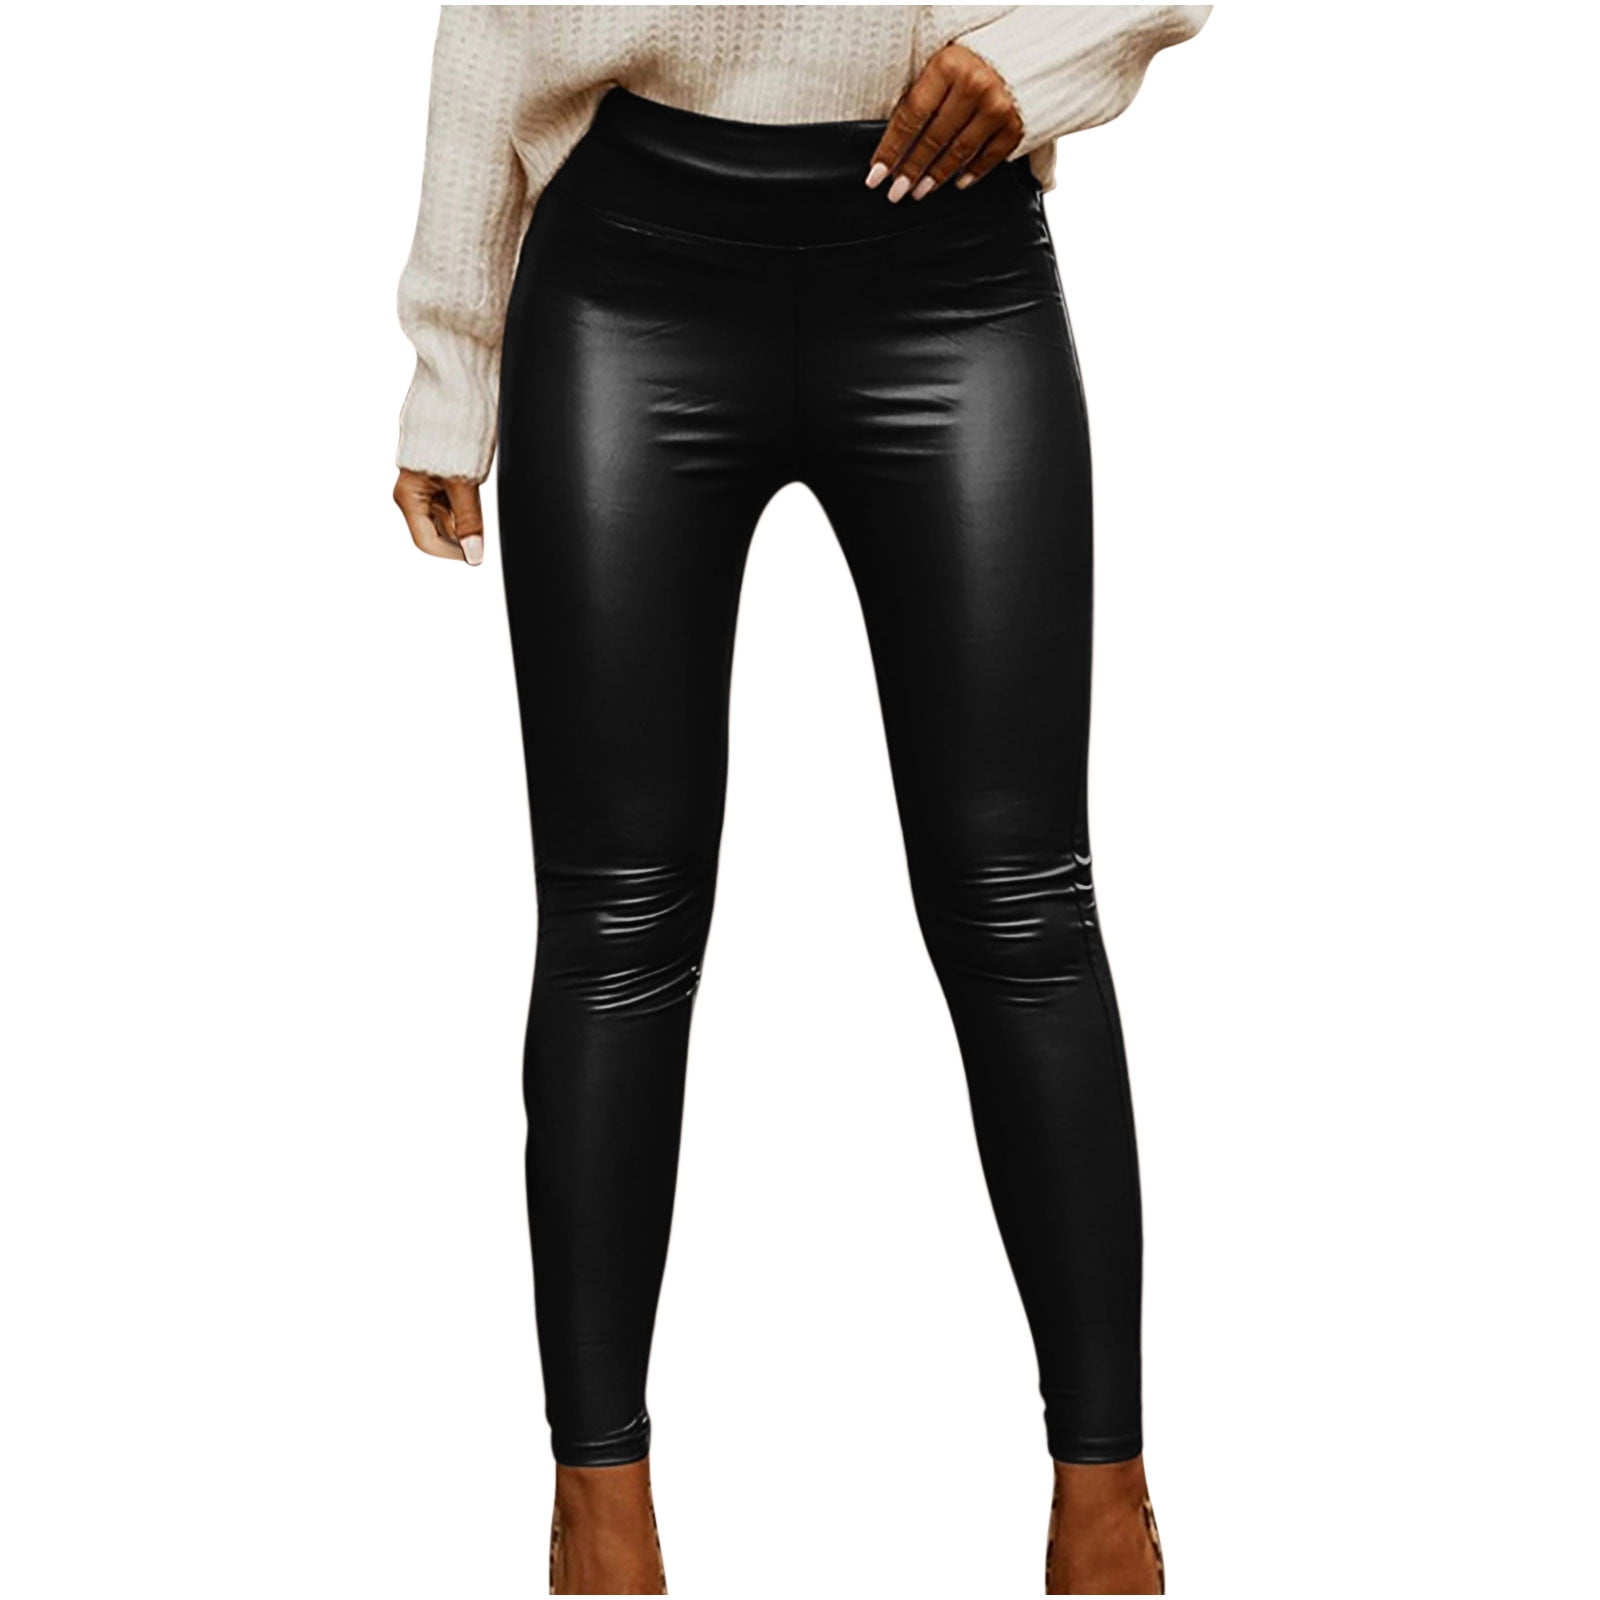 Faux Leather Leggings for Women Black Stretchy Ruchy PU Elastic High Waisted  Shiny Sexy Pleather Cropped Pants 